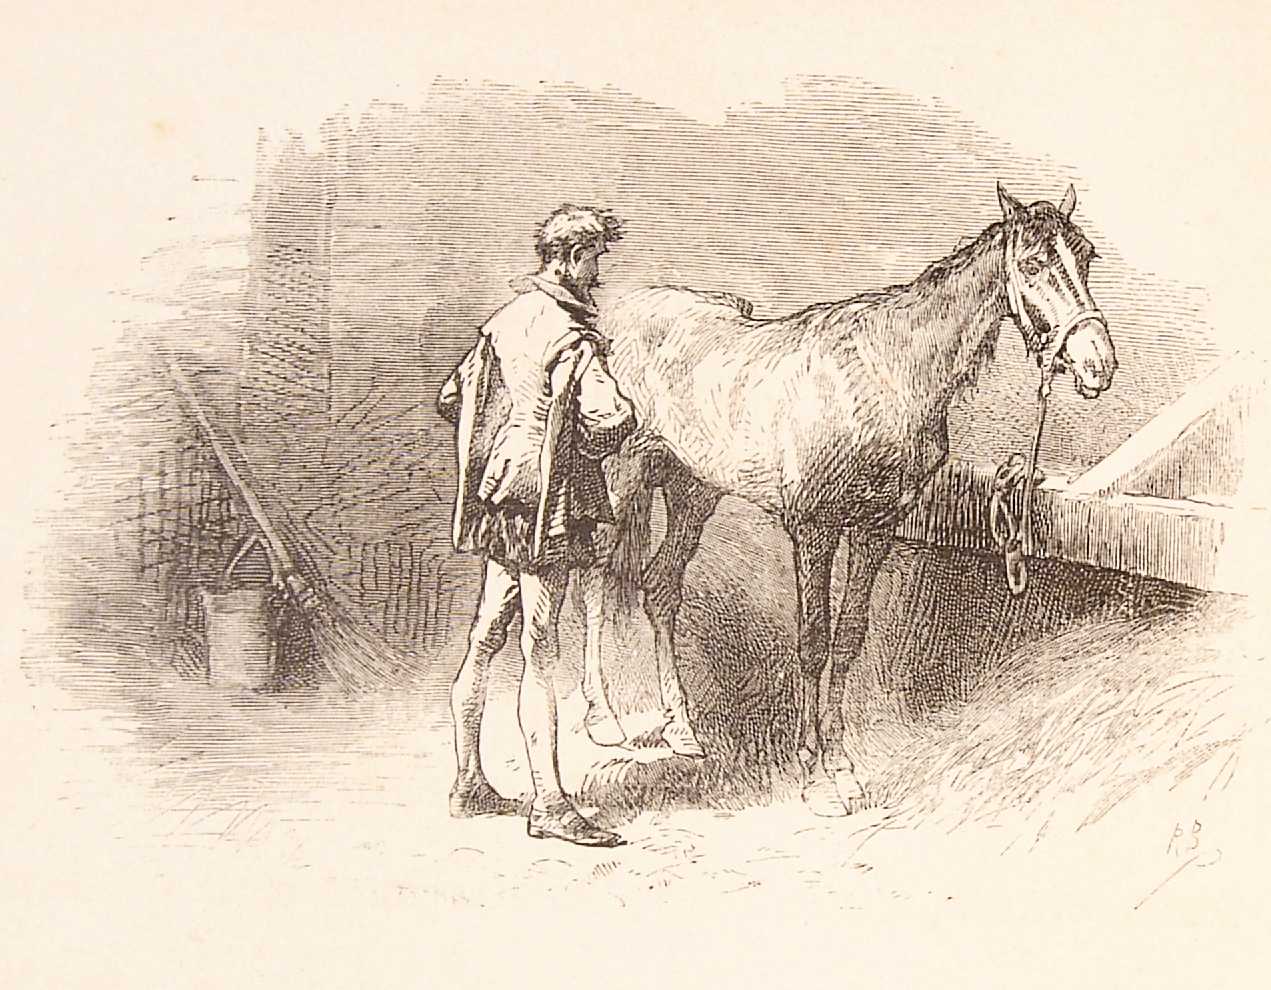 the man in the illustration is standing beside a horse